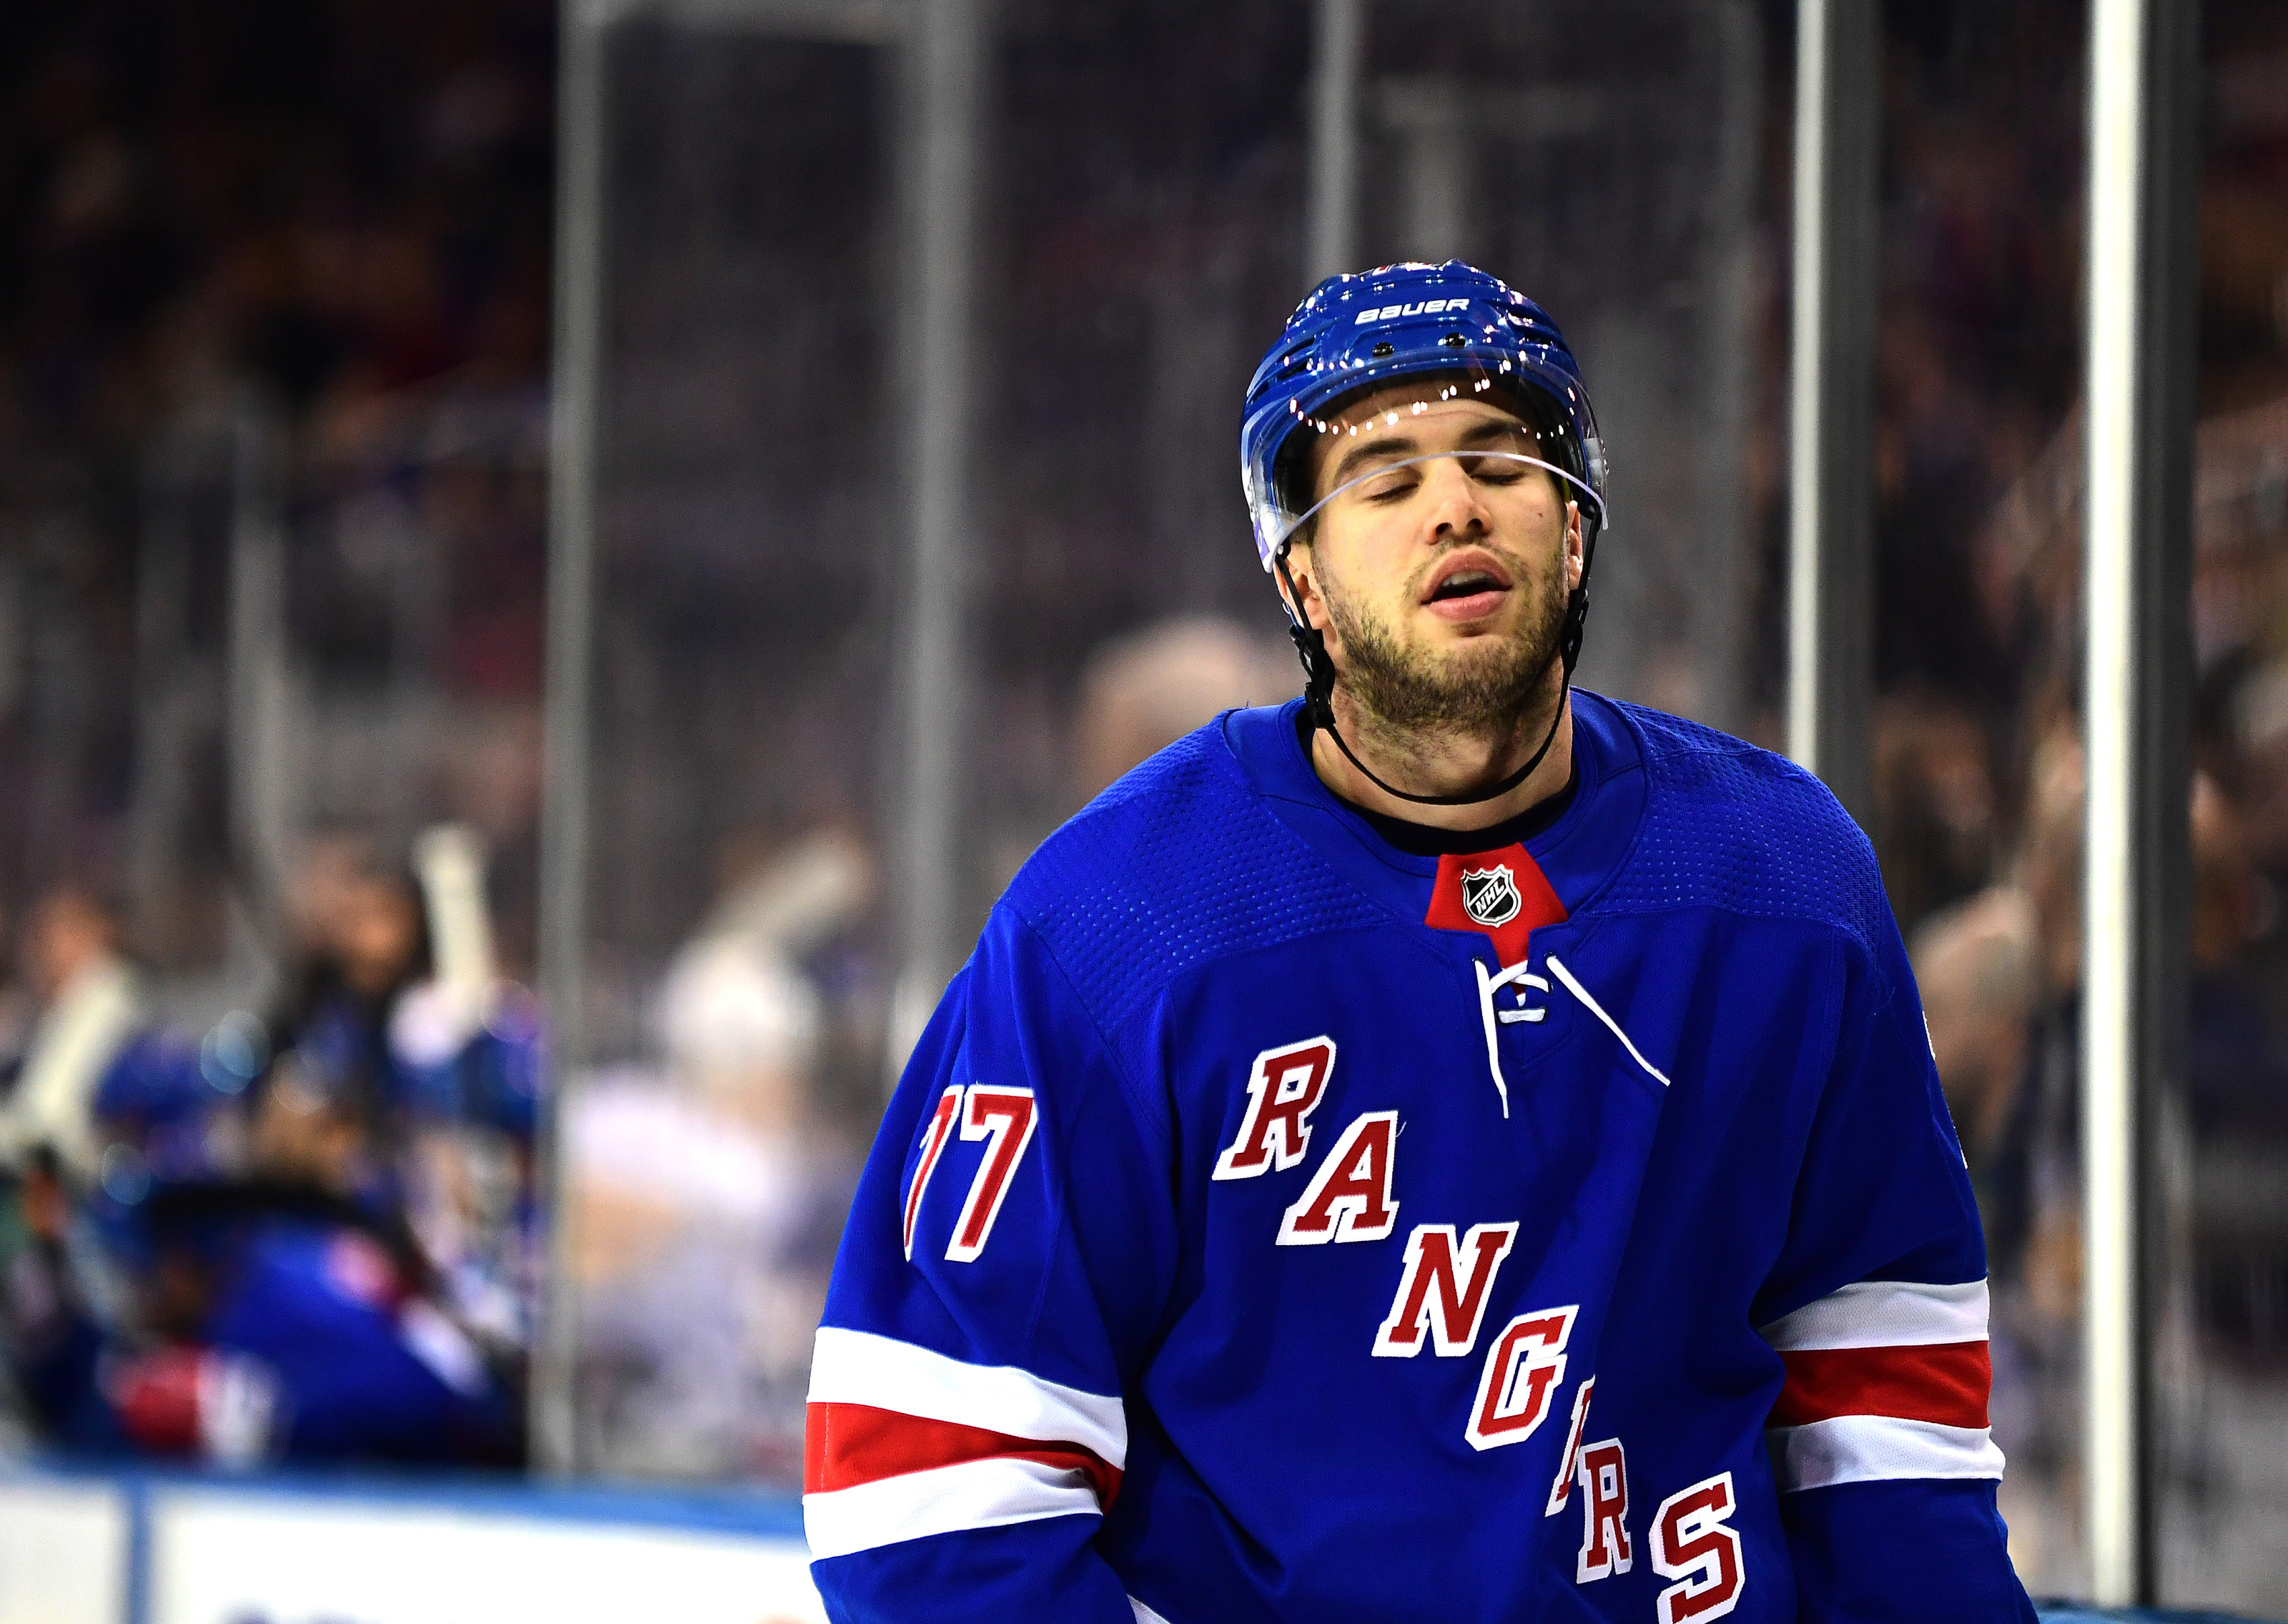 New York Rangers must move on from Tony DeAngelo mess and focus on